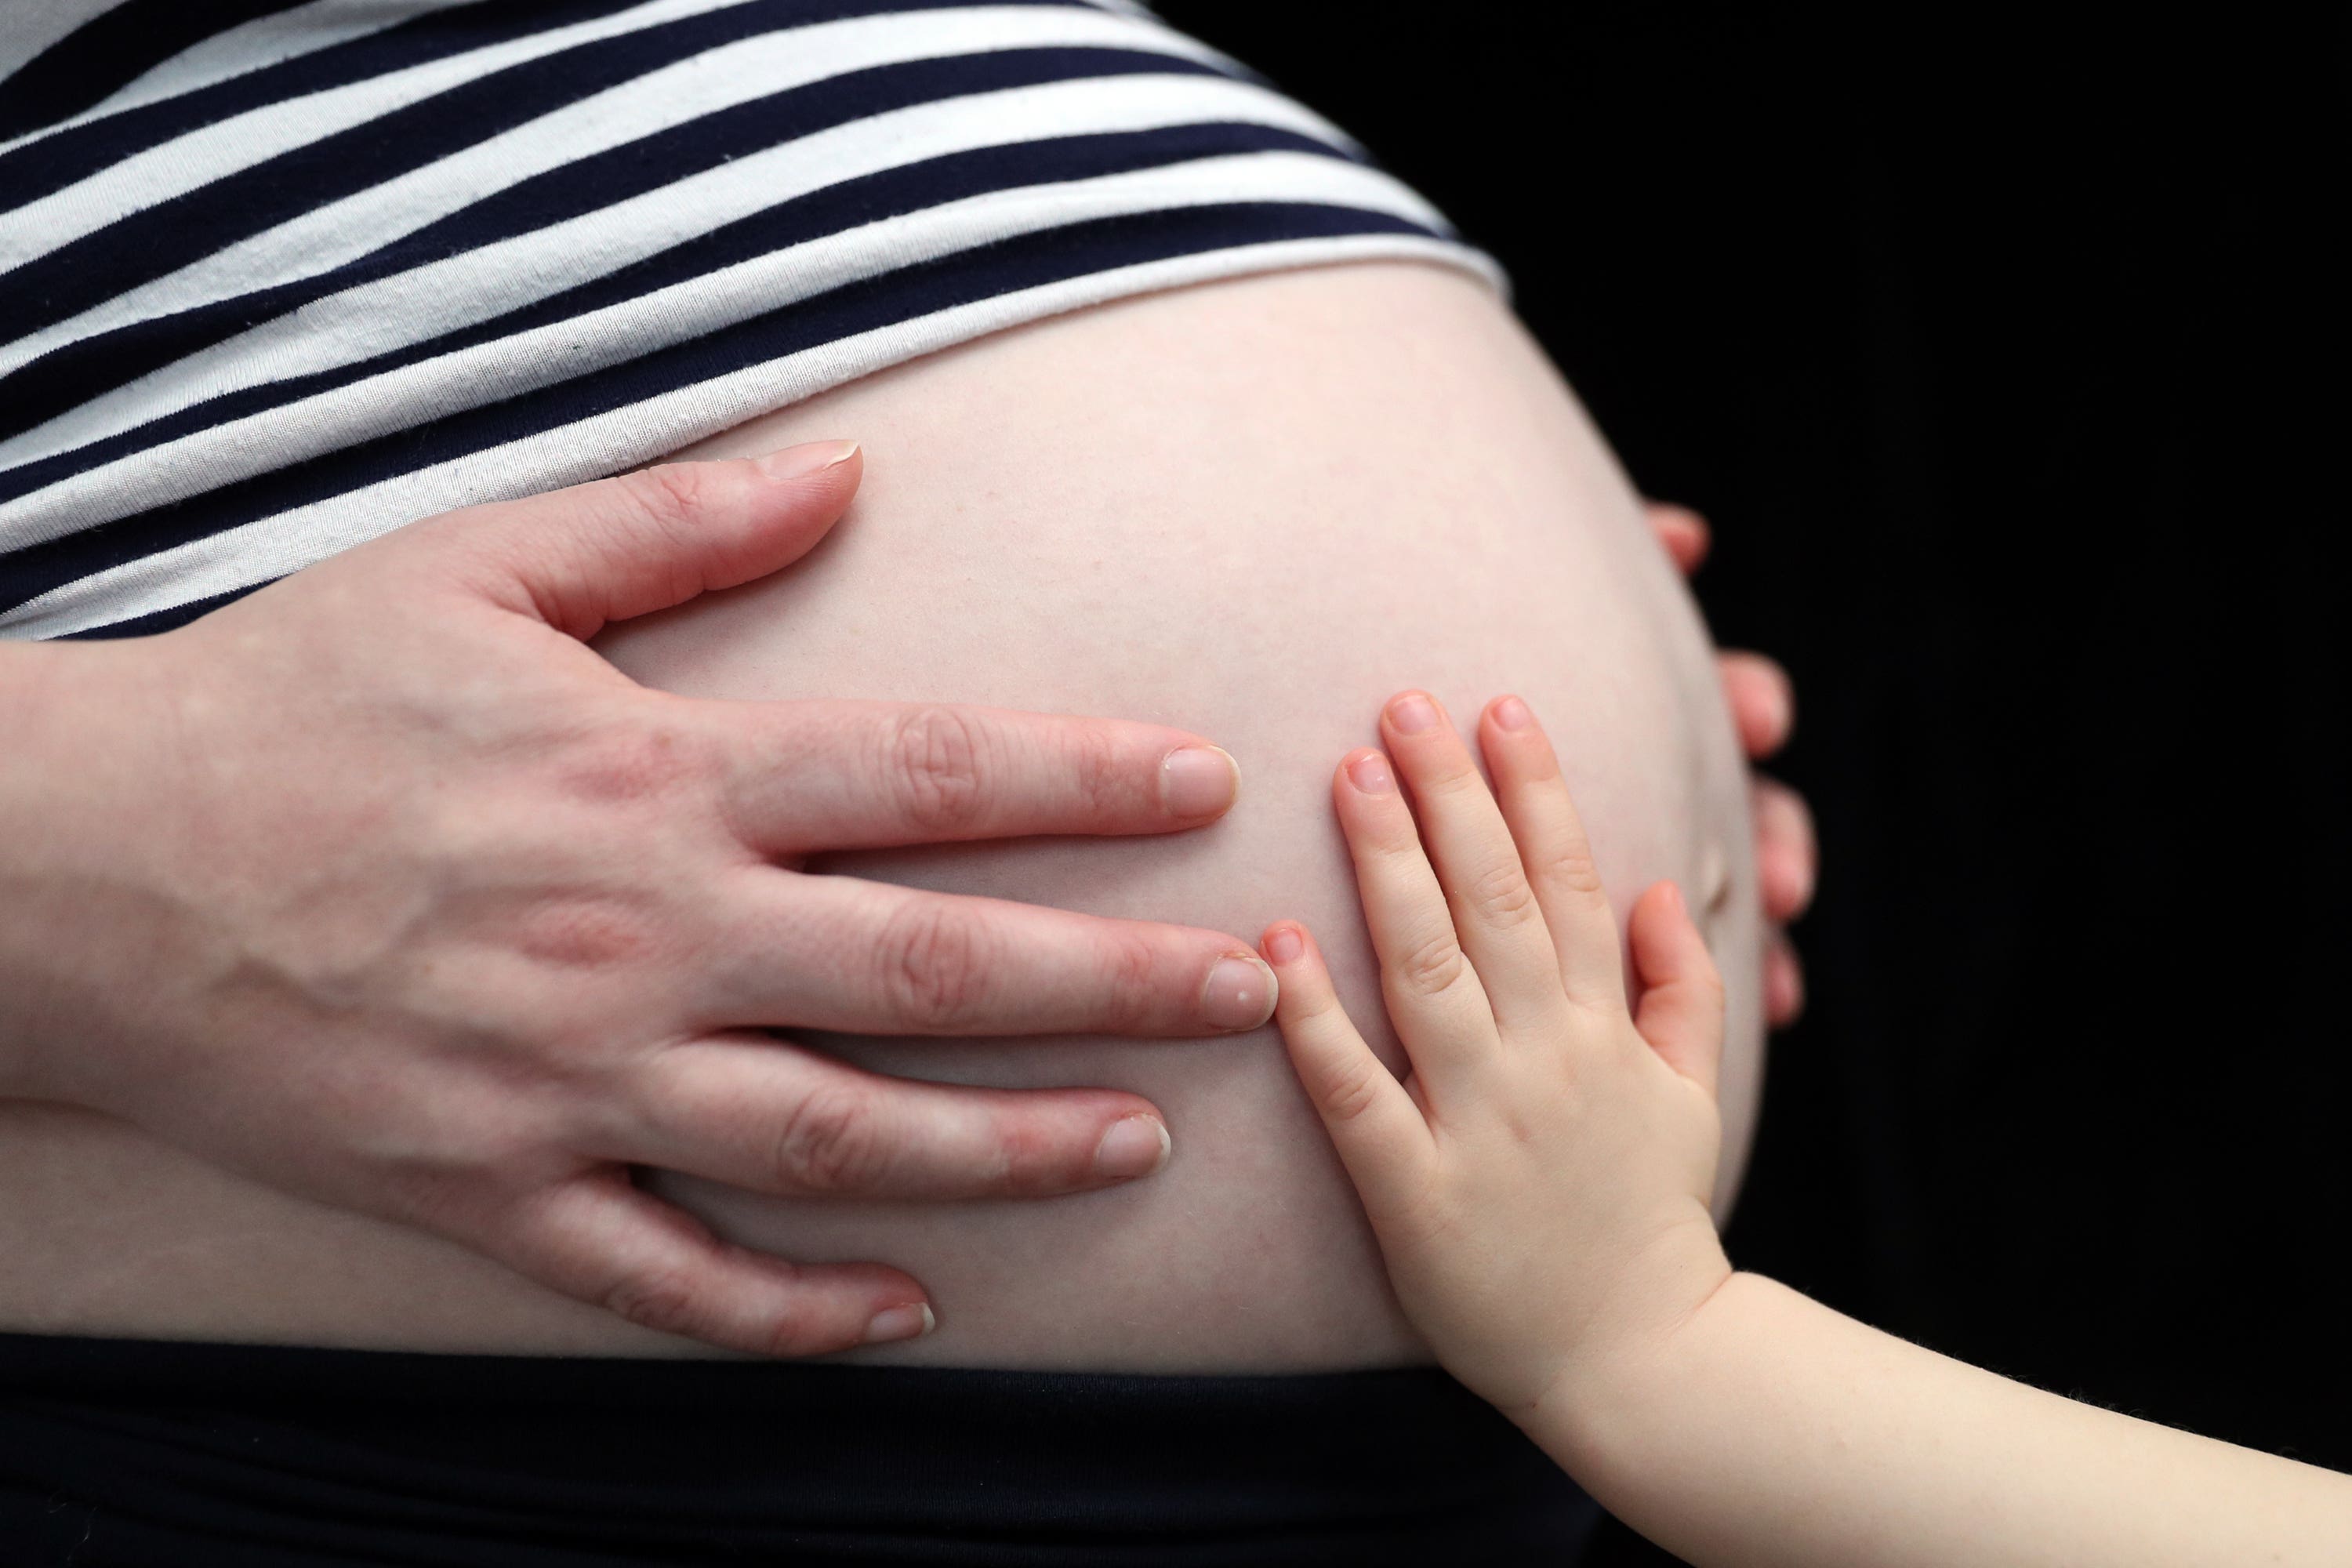 New data reveals that today, one in 25 UK births is to a woman aged 40-plus